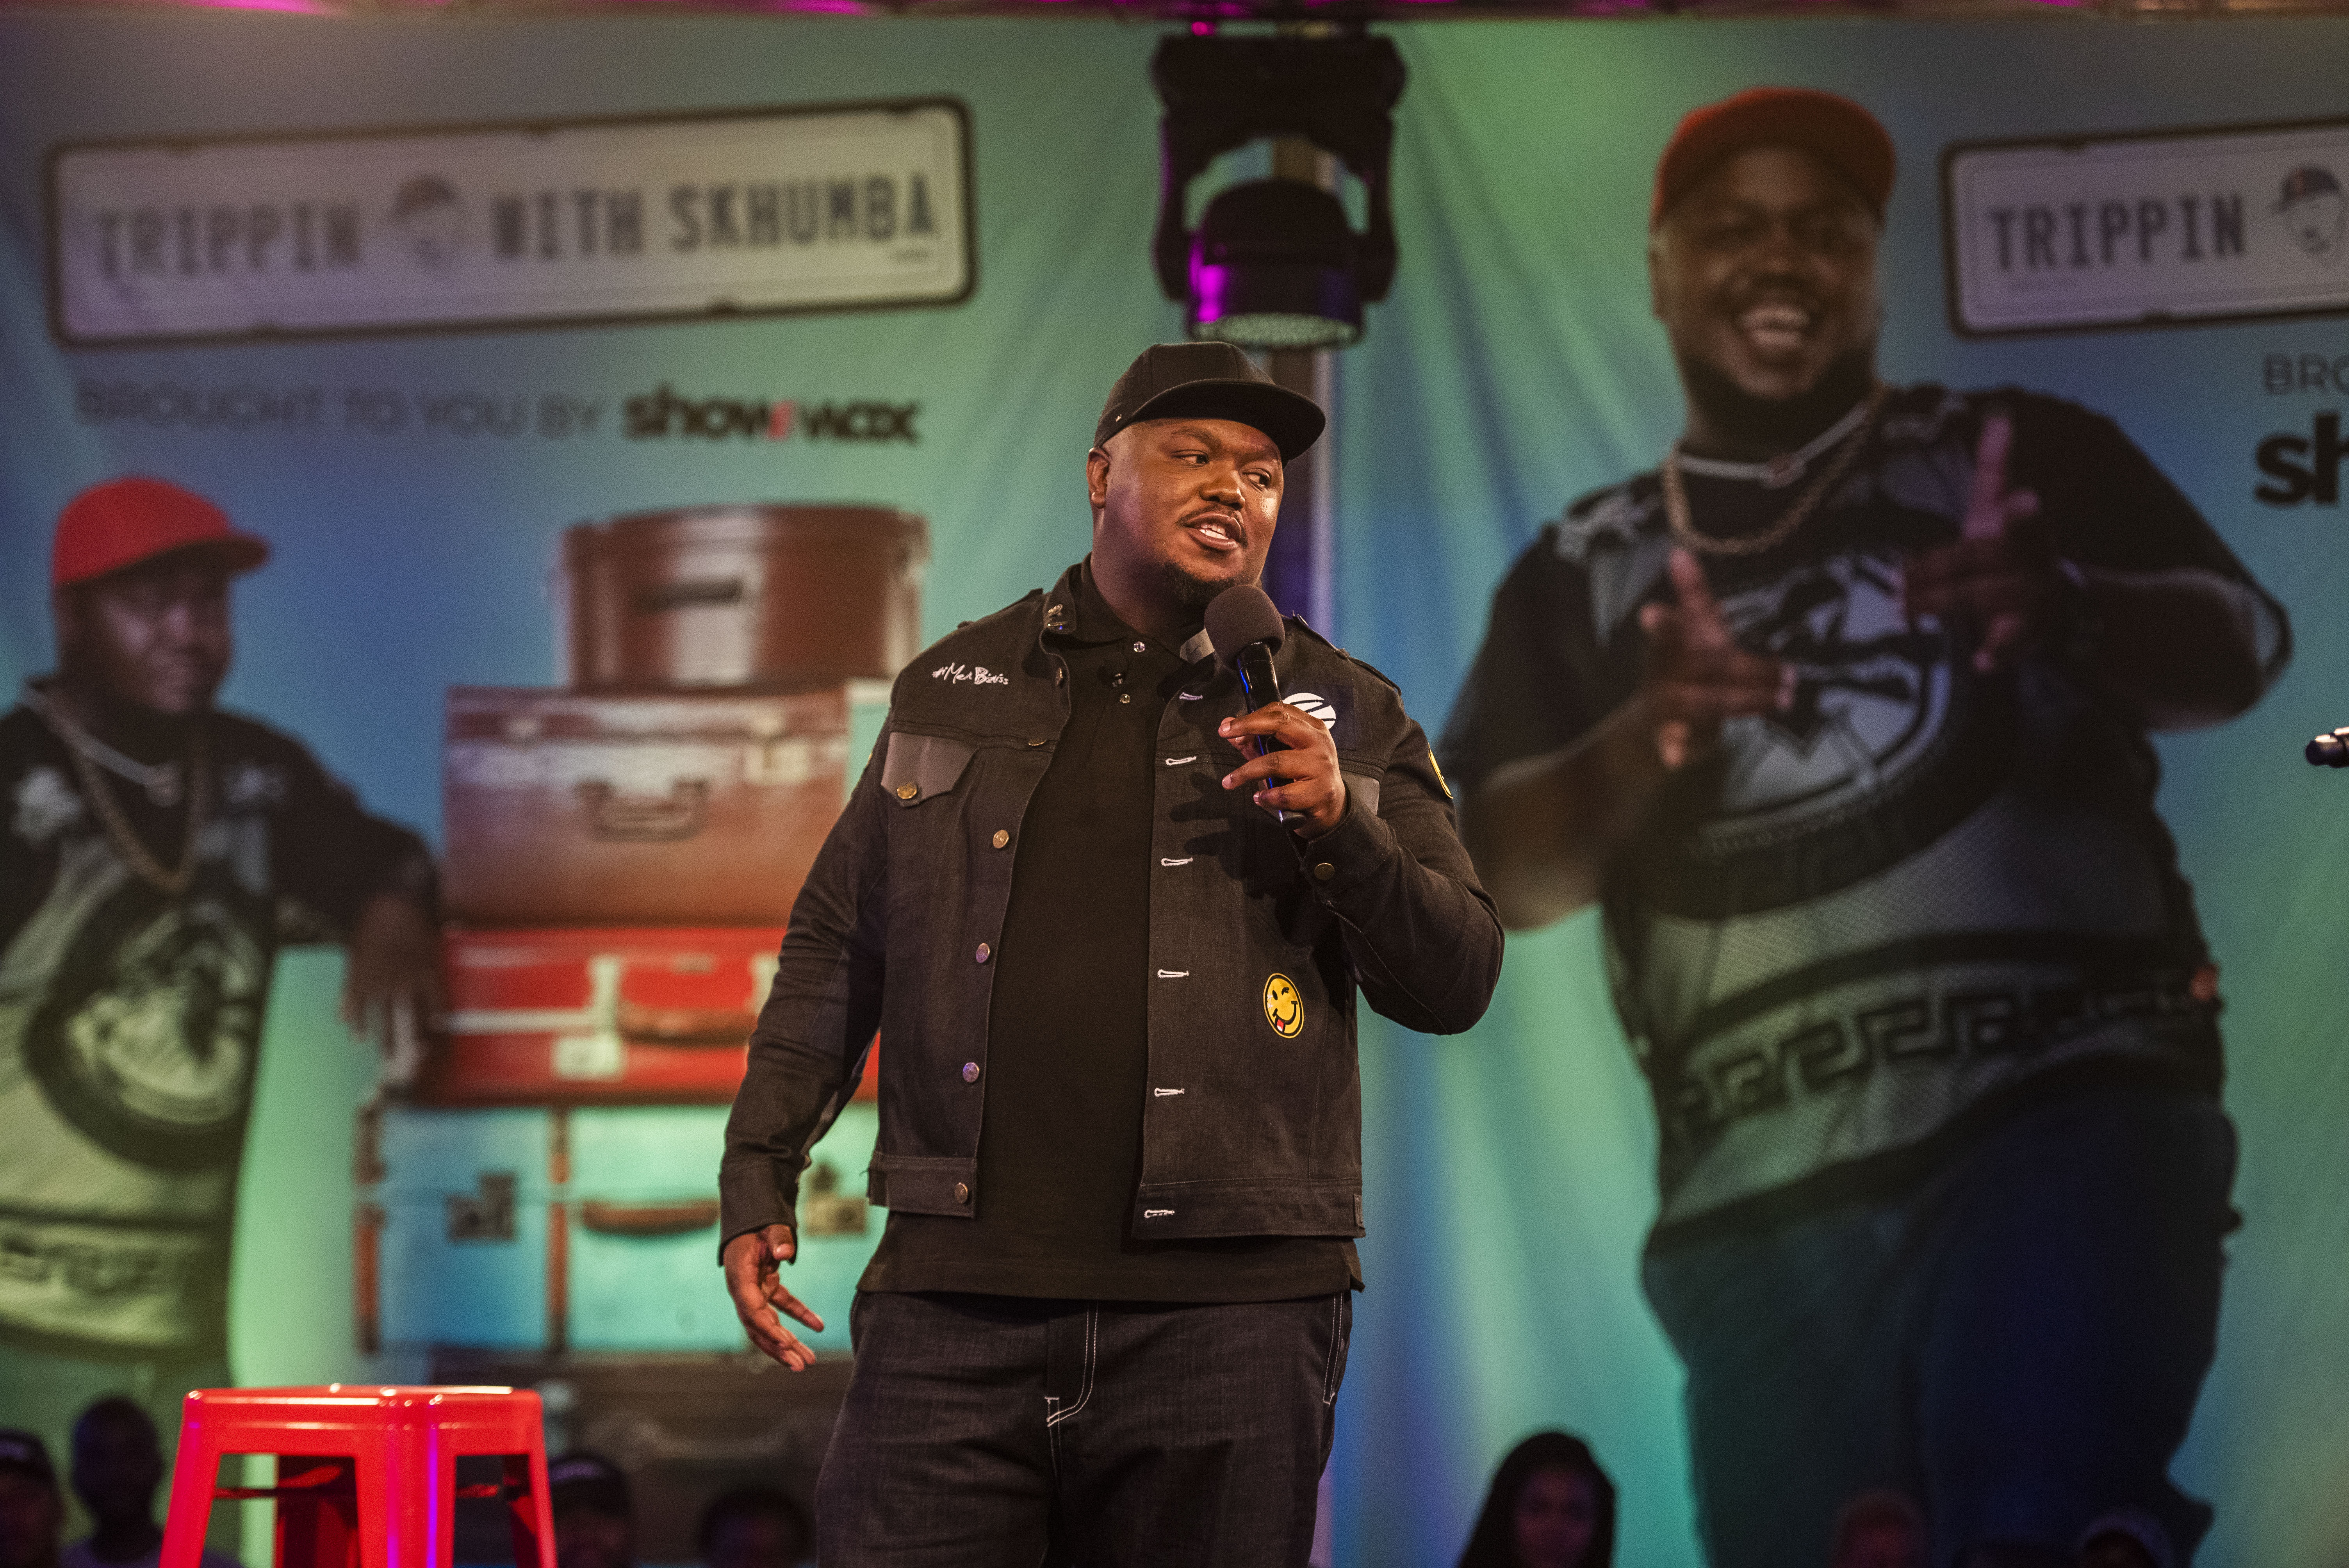 JOHANNESBURG, SOUTH AFRICA – MARCH 23, 2019: Skhumba Hlophe perform ath the launch of the new local Showmax Original show Trippin with Skhumba held on Saturday 23 March 2019 at 1 Fox Street. The show is taking Skhumba around the country visiting the hometowns of his comedian friends Mashabela Galane, Celeste Ntuli, Tumi Morake, Salesman, Siya Seya and Schalk Bezuidenhout. Along the way they engage with up-and-coming comics from each of the comedians’ hometowns. These rising stars got to share the stage for the first time with their mentors at this event. Photo by Gallo Images / Alet Pretorius)